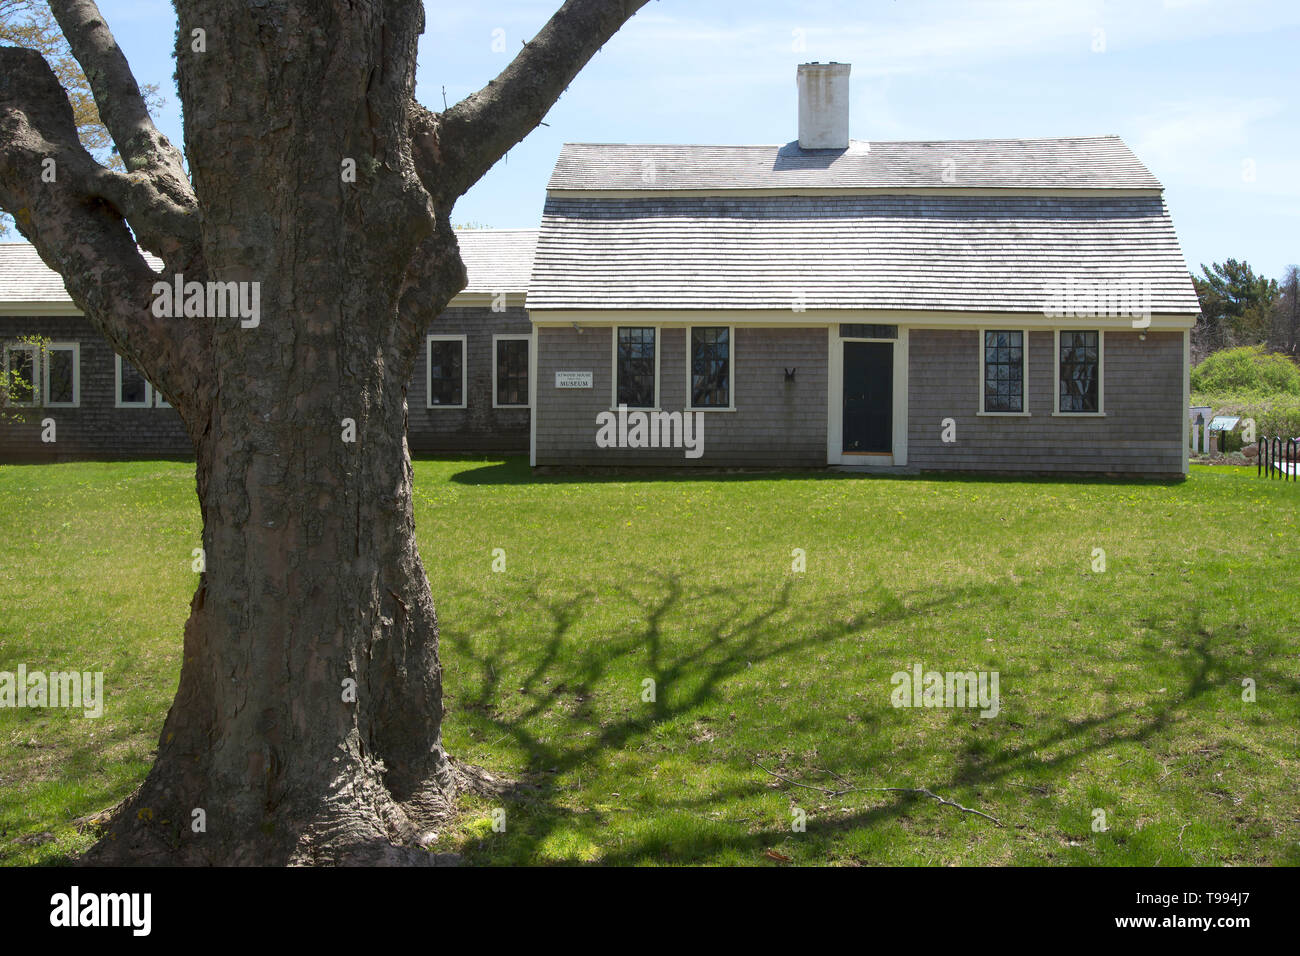 The historic Joseph Atwood (1720 - 1795) house (1752). The oldest house, now a museum in Chatham, Massachusetts on Cape Cod Stock Photo